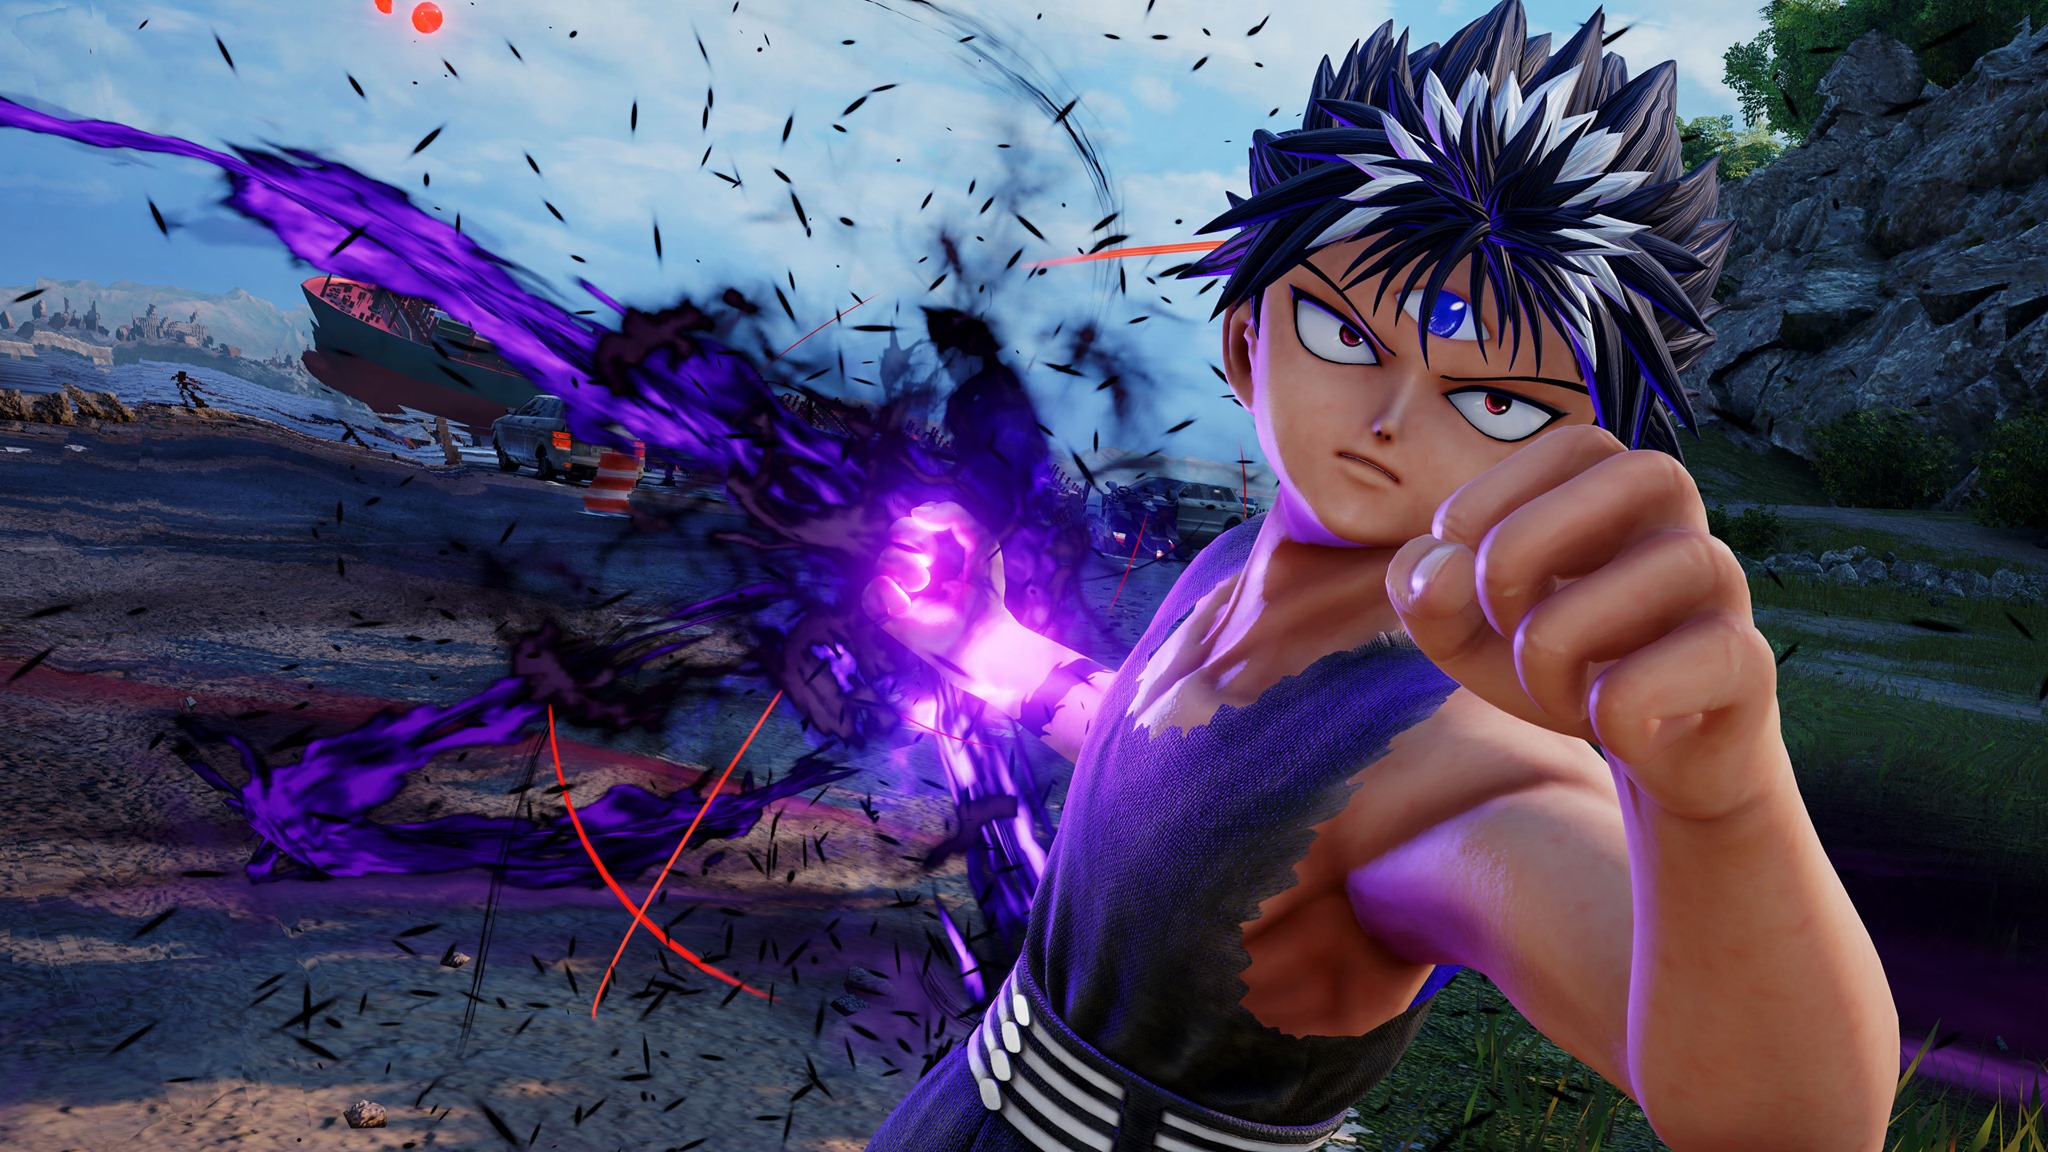 Jump Force Adding Dlc Character Hiei In 2021 On Switch Nintendo Everything Seven more characters have been revealed, all from manga already featured in the game, for a total of nine downloadable characters. jump force adding dlc character hiei in